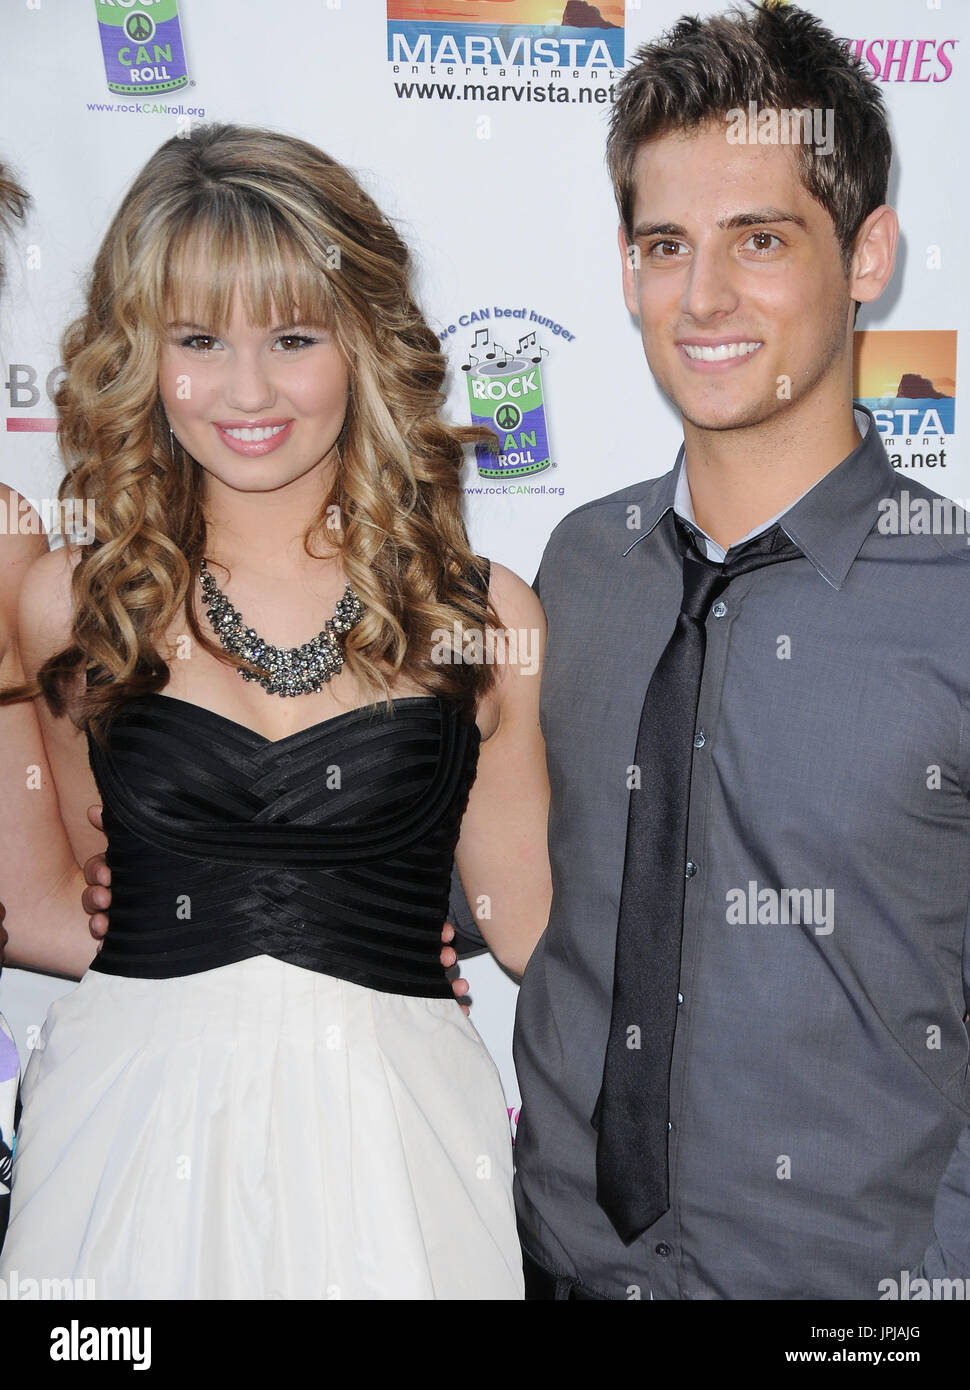 Debby Ryan & Jean-Luc Bilodeau at the Los Angeles Premiere of "16 Wishes"  held at the Harmony Gold Theater in Los Angeles, CA. The event took place  on Tuesday, June 22, 2010.